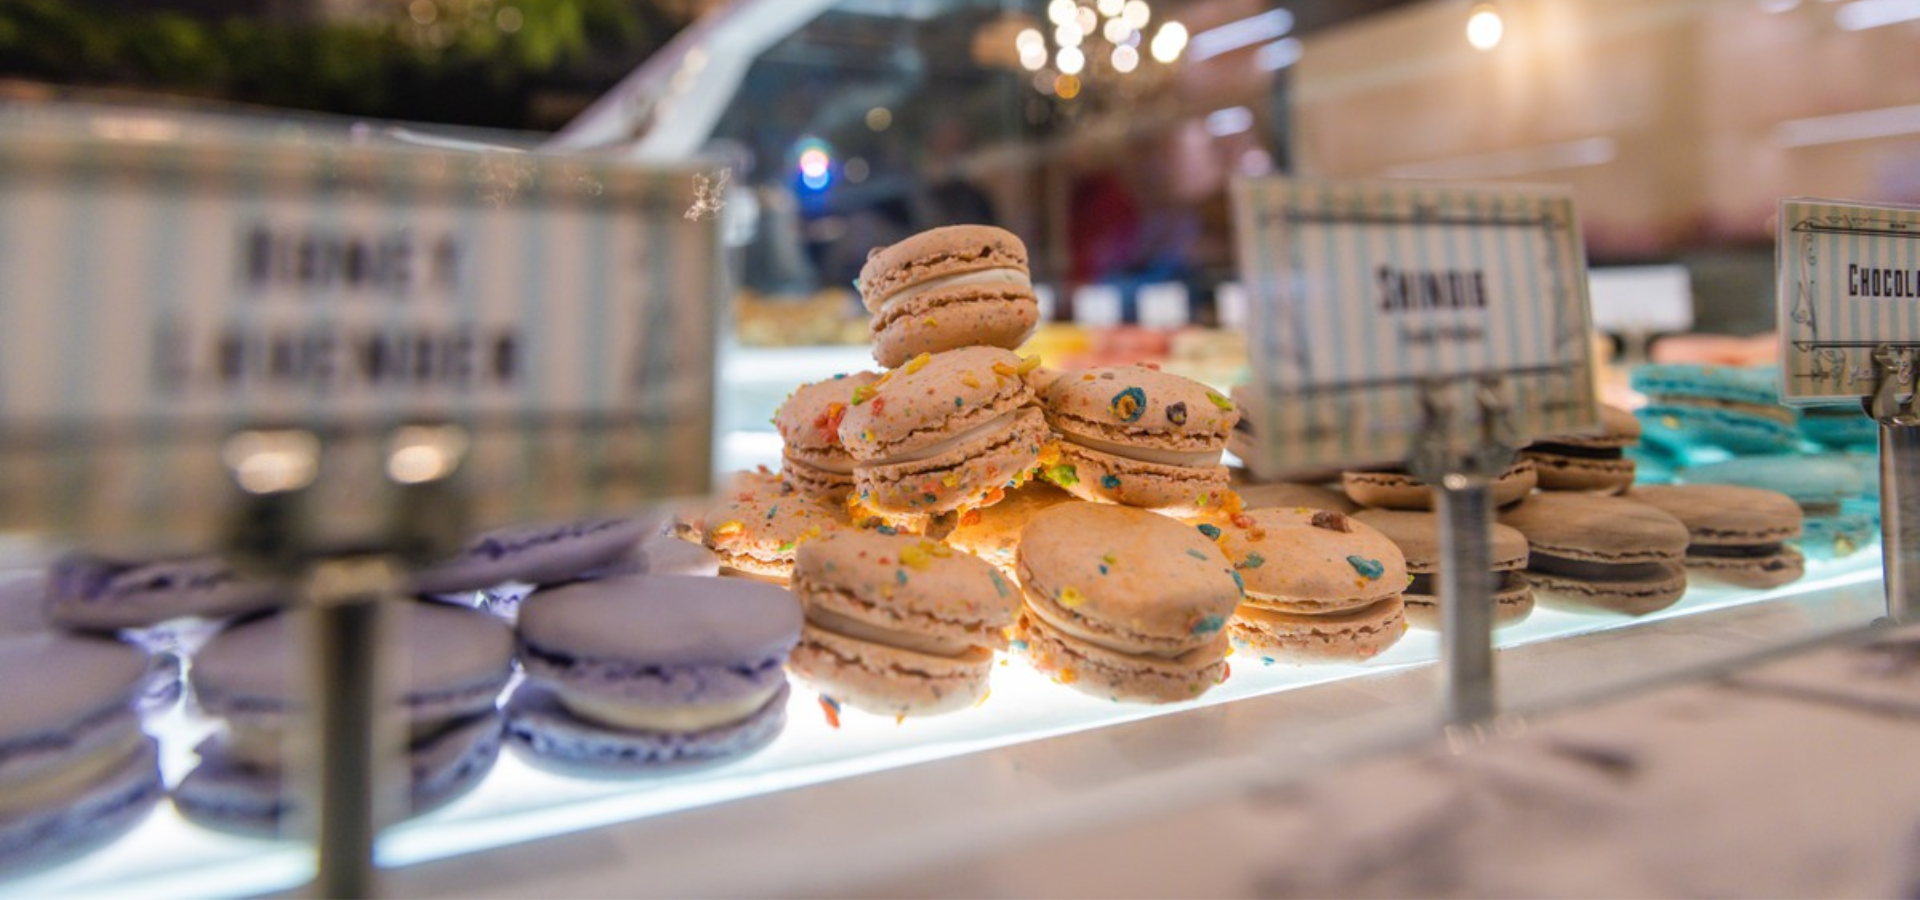 Display case with French Macarons.